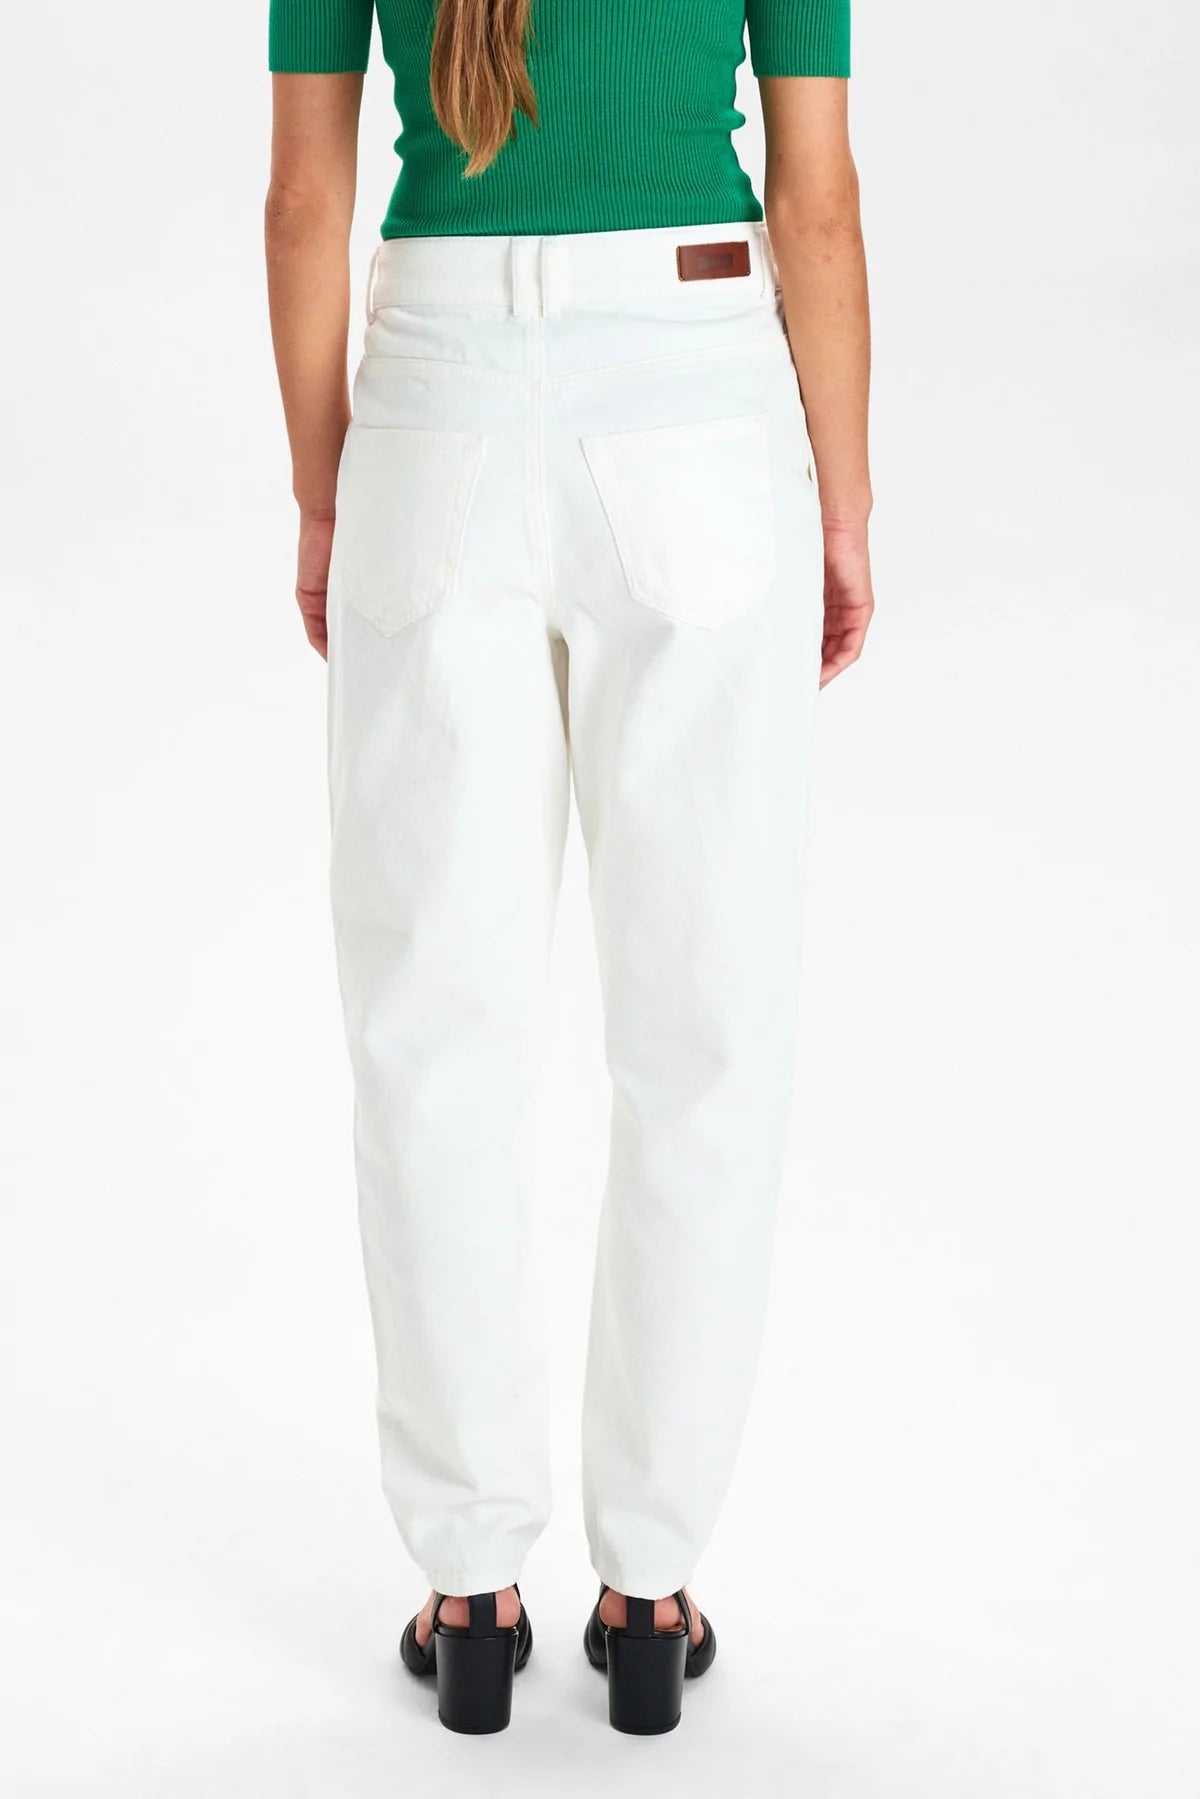 Nümph Nustormy Straight Leg Jeans in Bright White